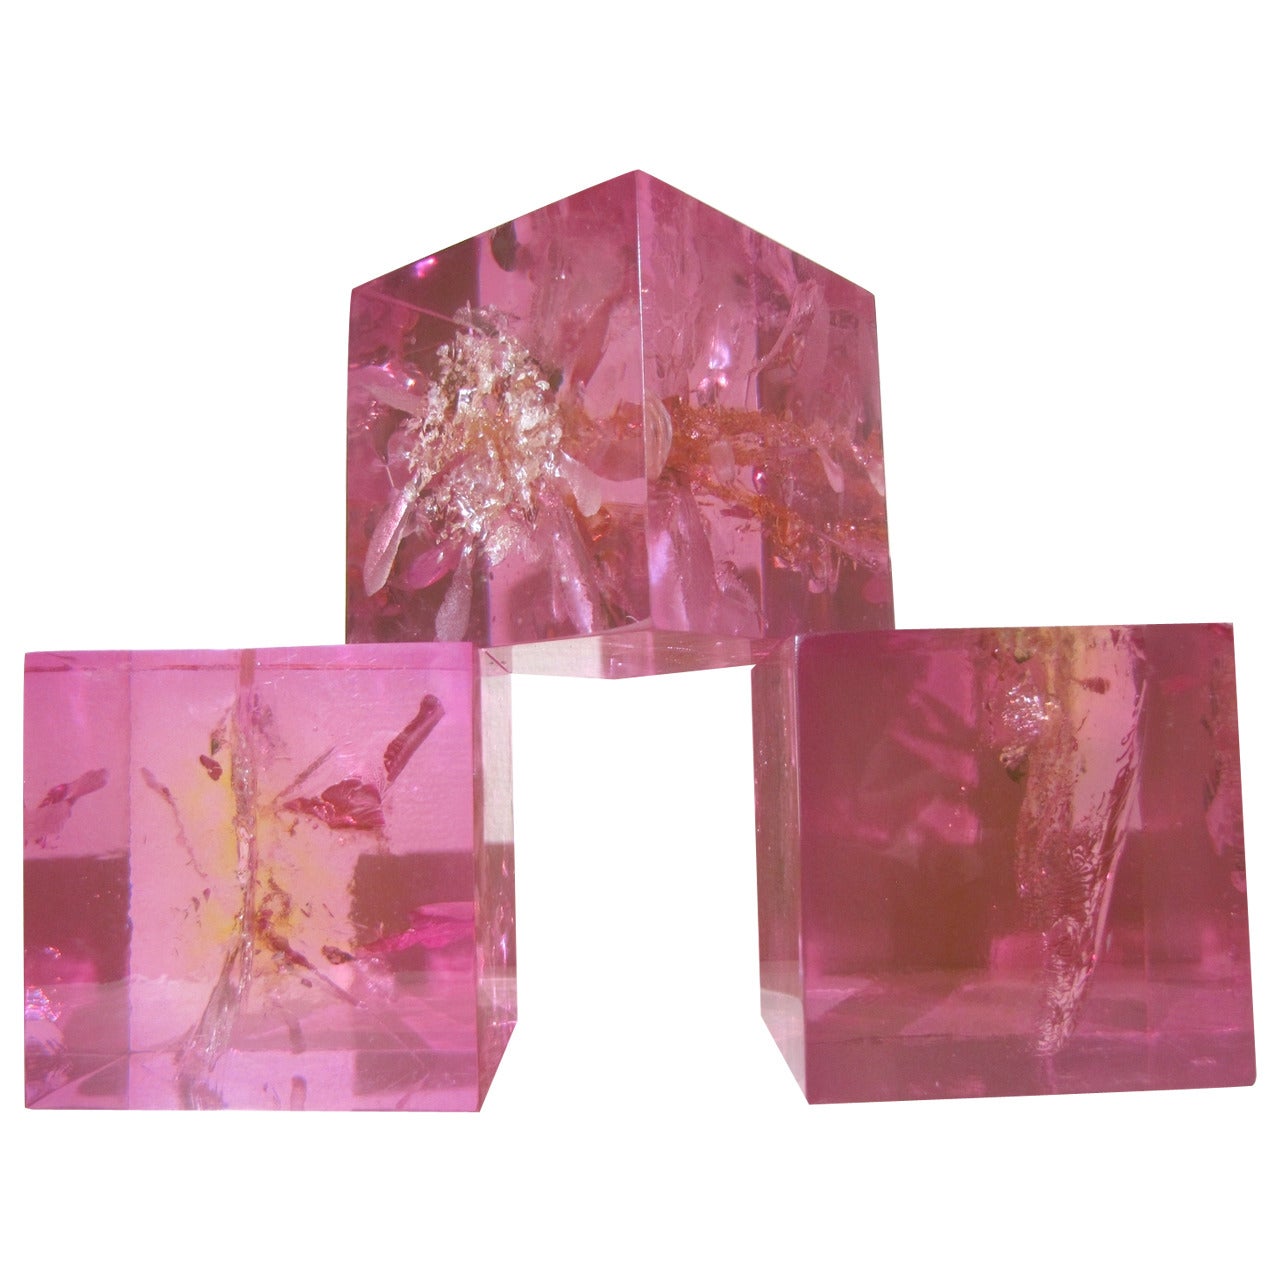 Three cubes in pink fractal resin